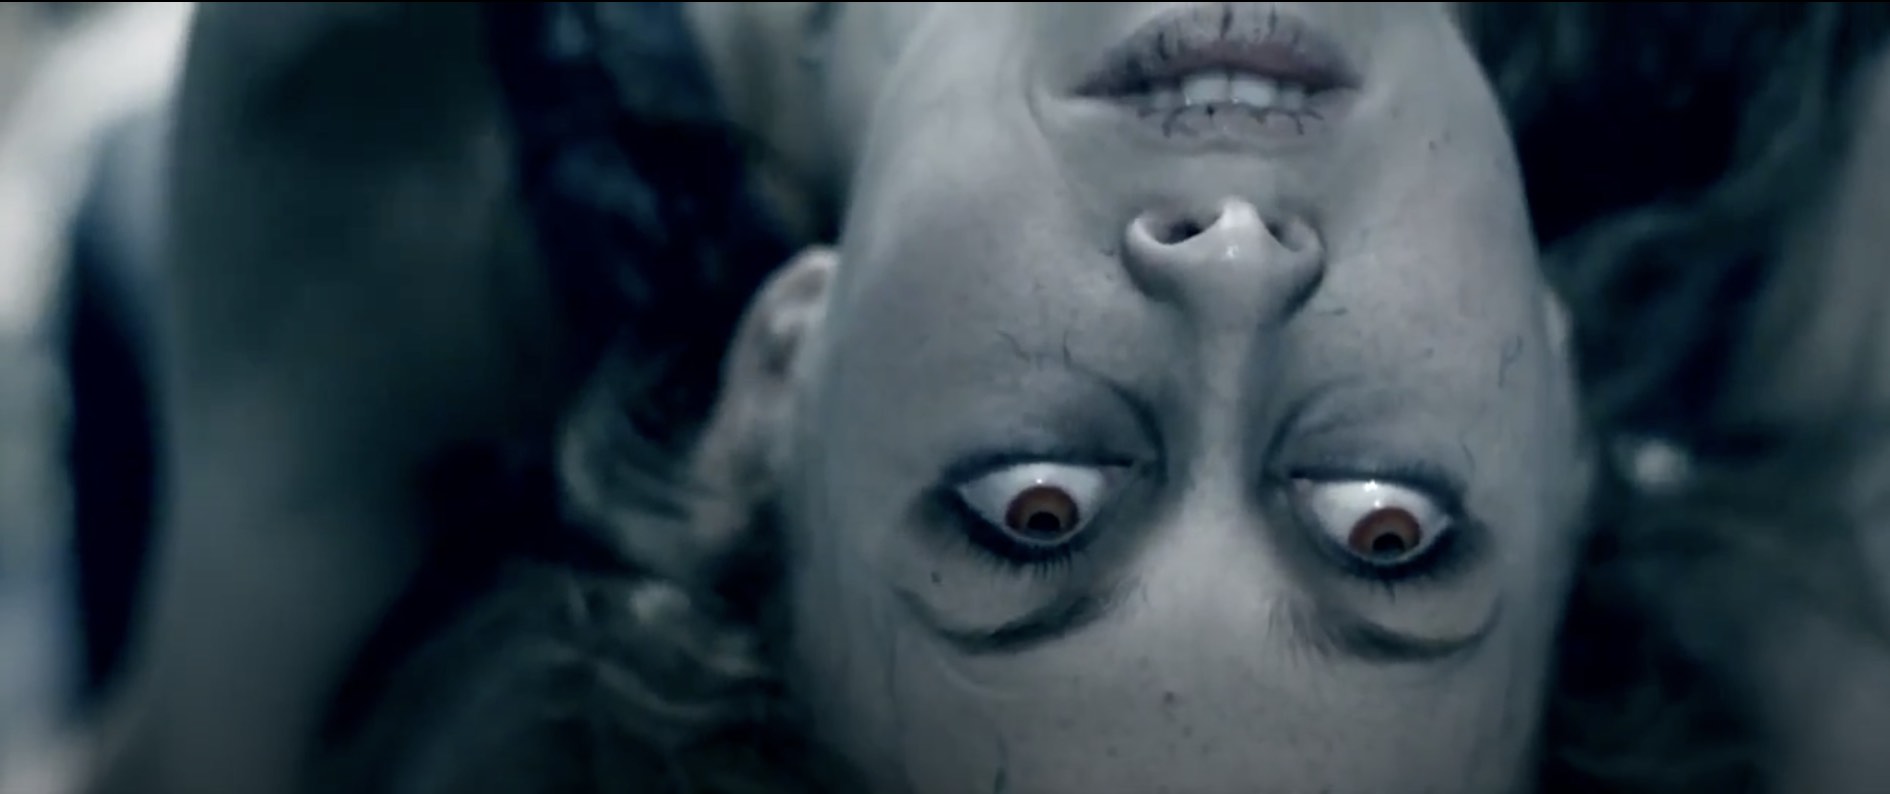 DELIRIUM aka THE HAUNTING OF EMILY (2015) Reviews and overview MOVIES